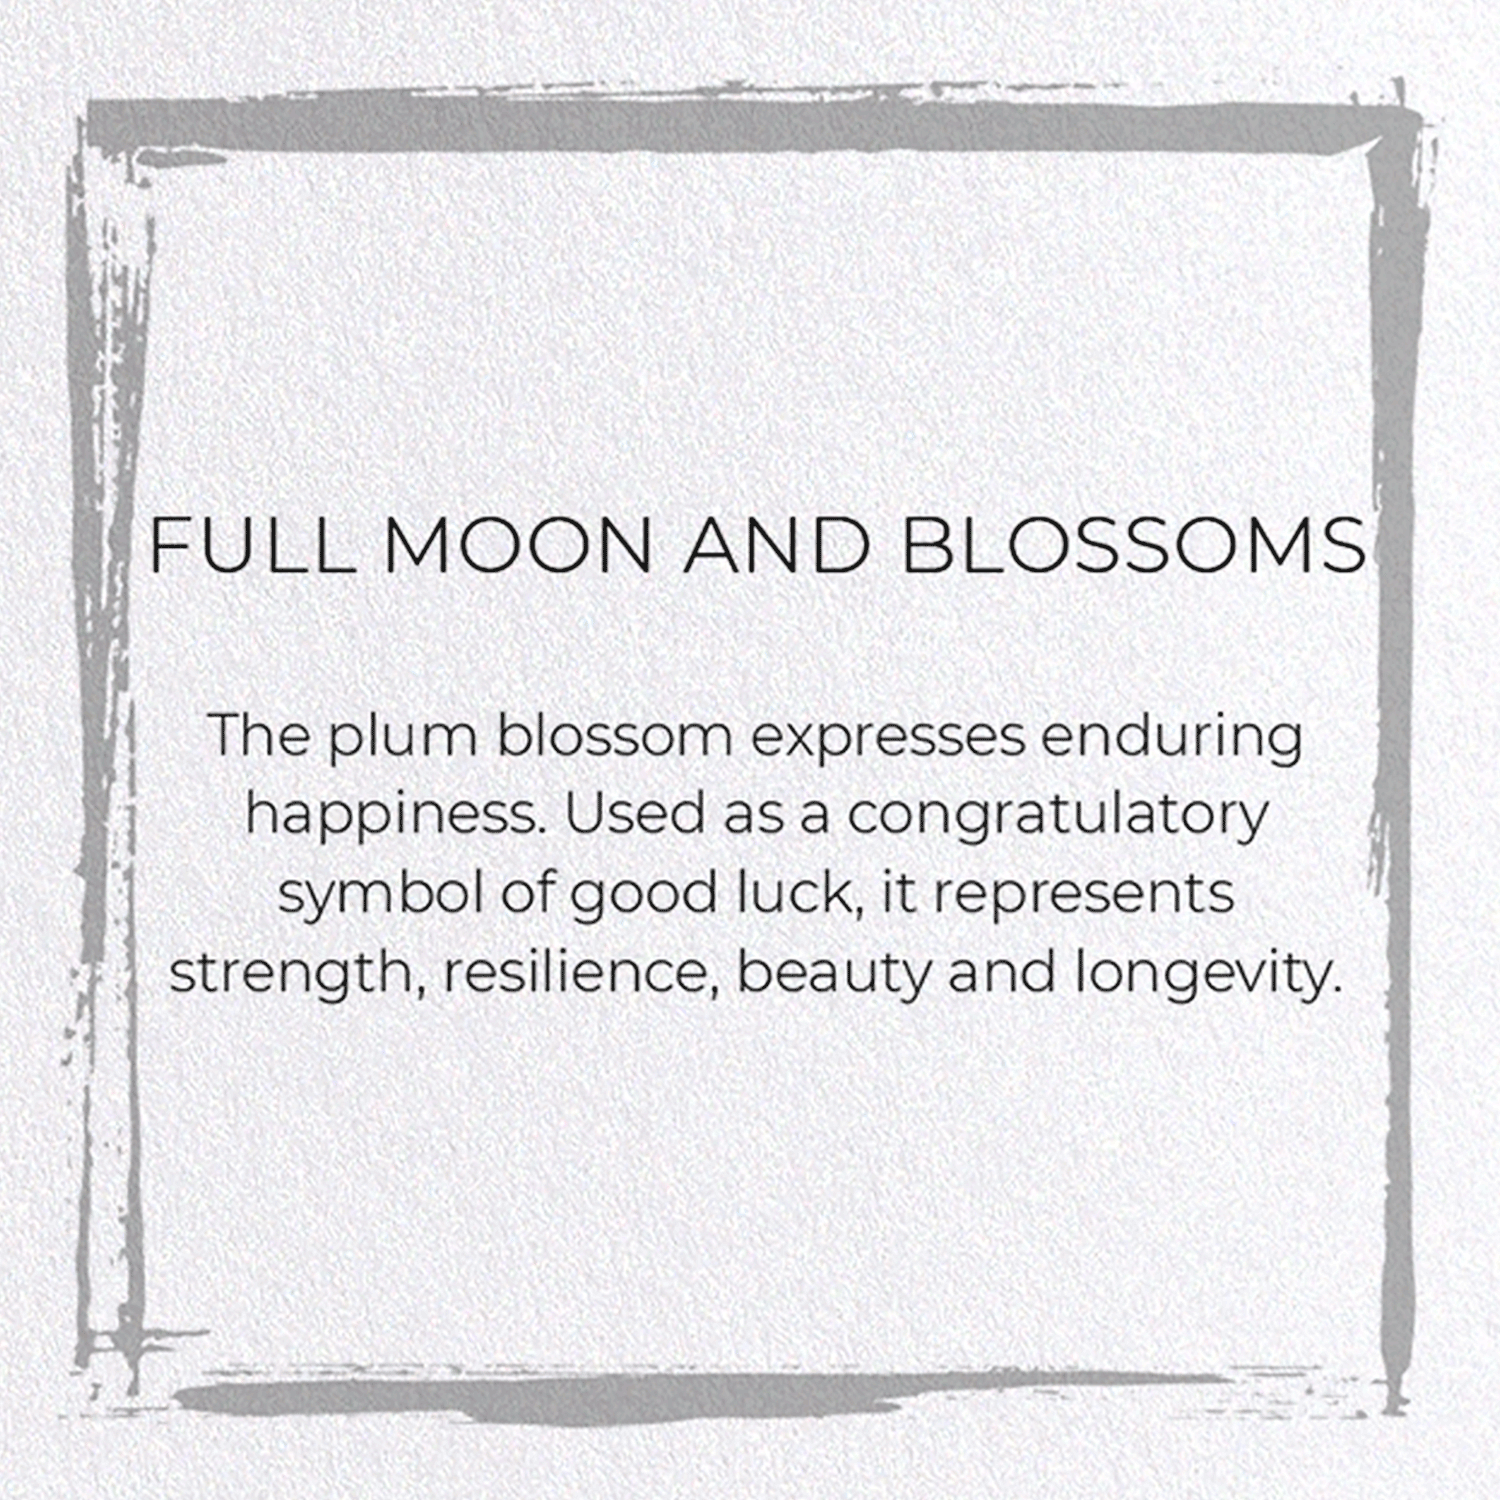 FULL MOON AND BLOSSOMS